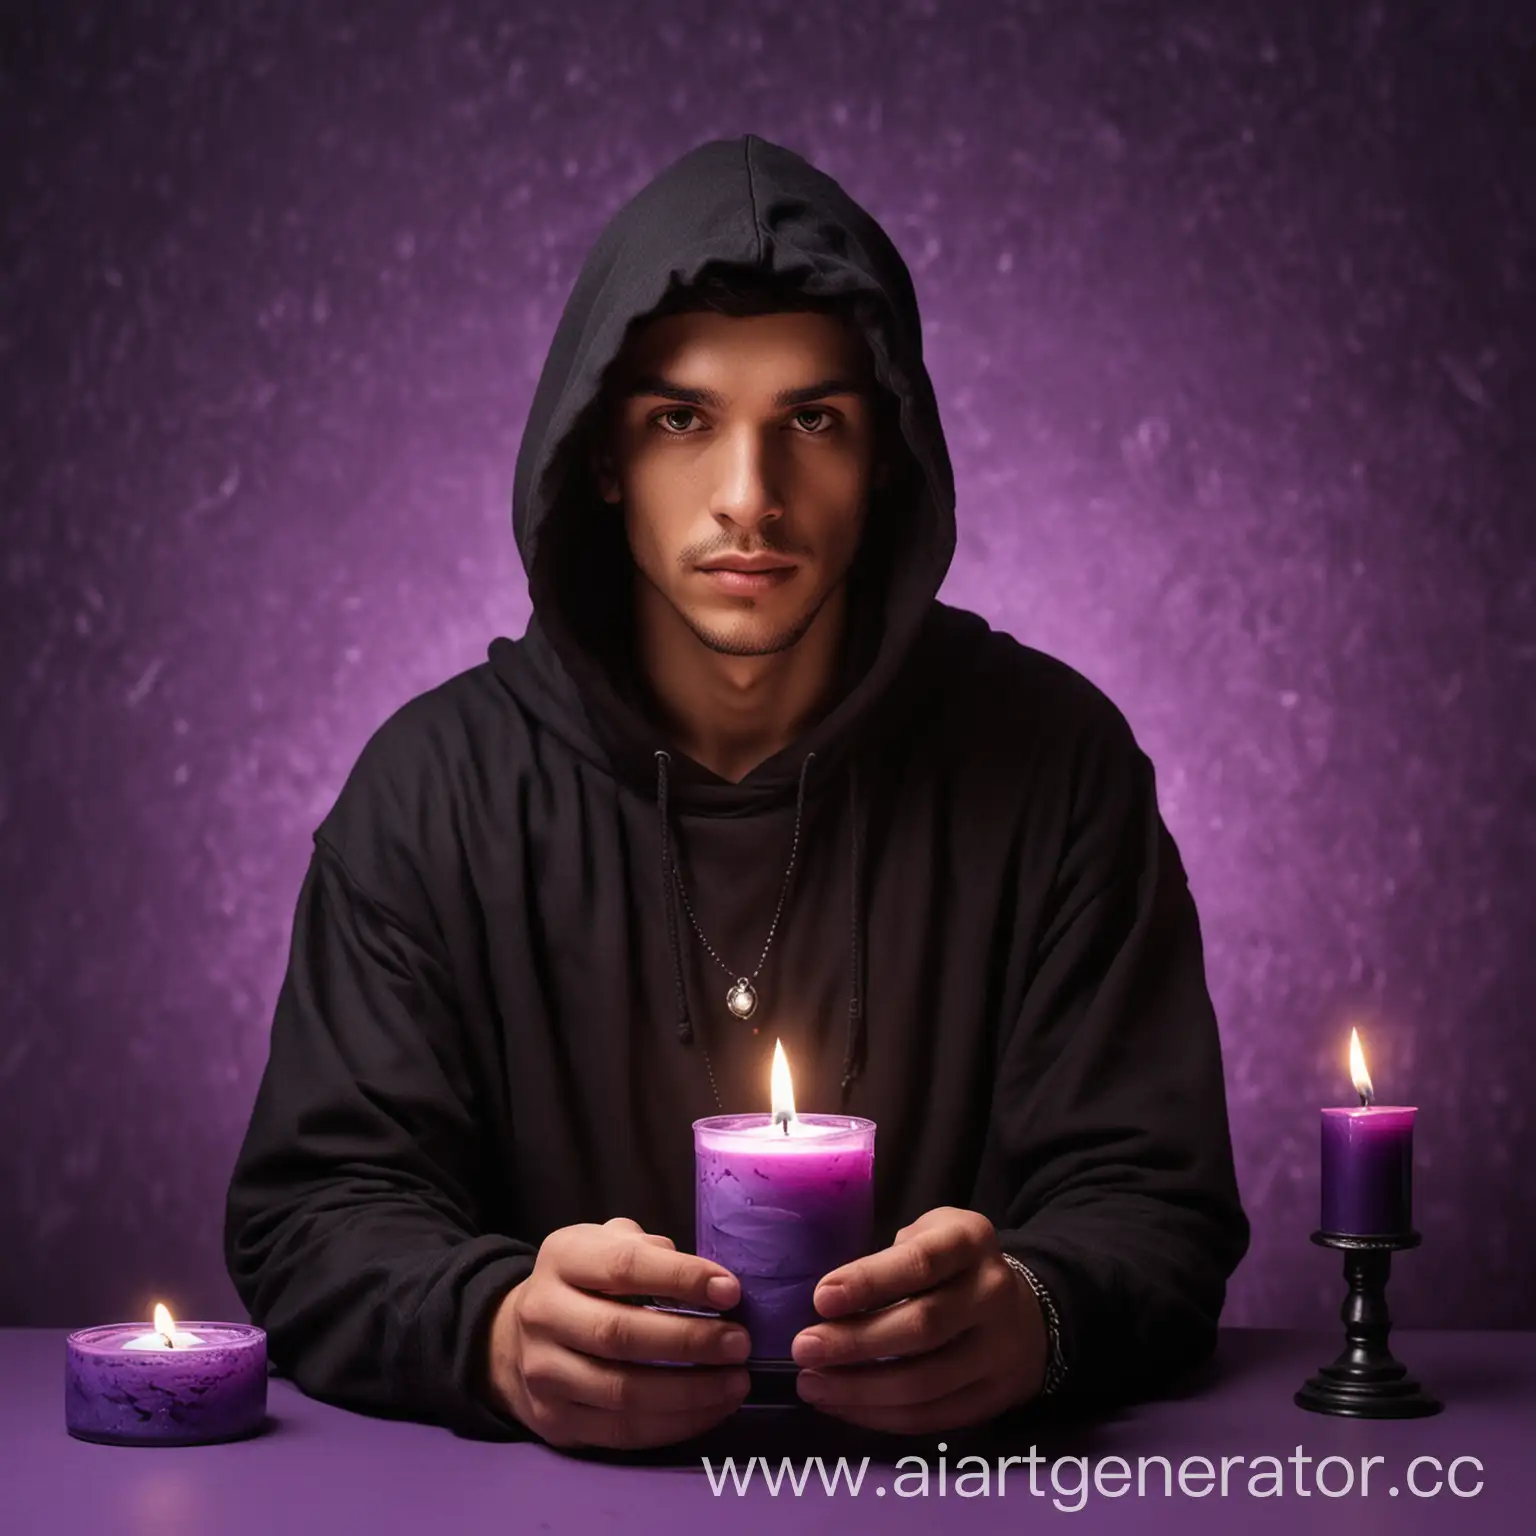 Young-Man-Fortune-Teller-in-Black-Hoodie-Surrounded-by-Purple-Candles